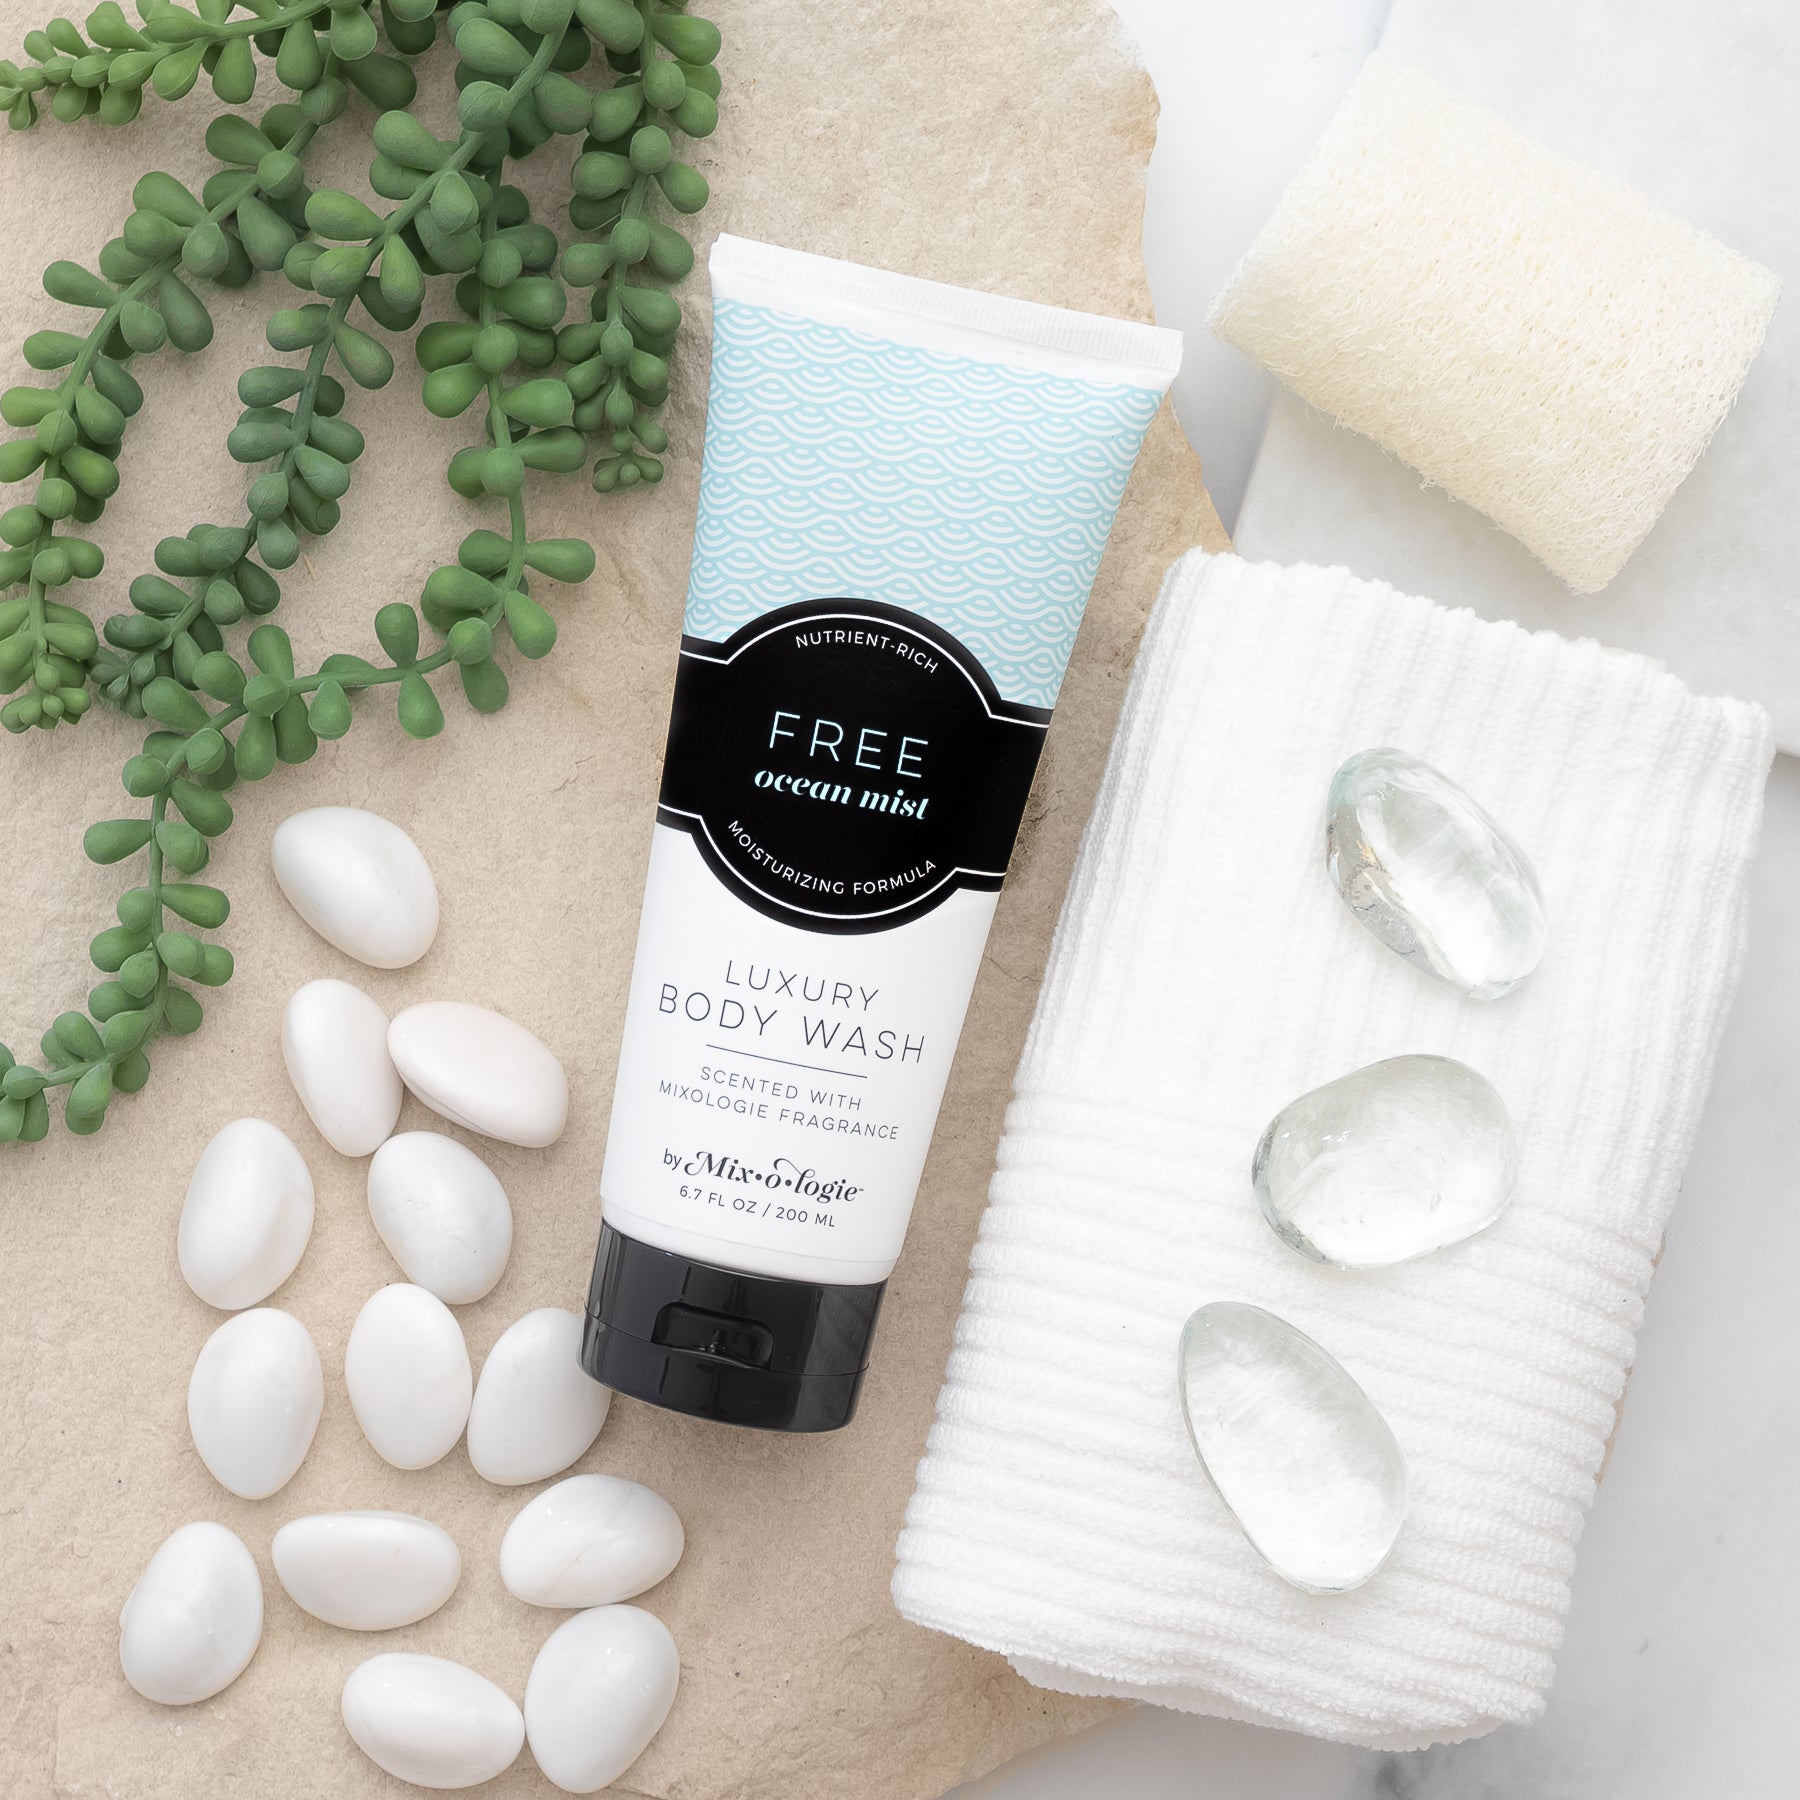 Luxury Body Wash in Mixologie’s Free (Ocean Mist) in light blue color sample package with black label. Contains 6.7 fl oz or 200 mL pictured on a large rock with greenery, white pebbles, a towel, and sponge.